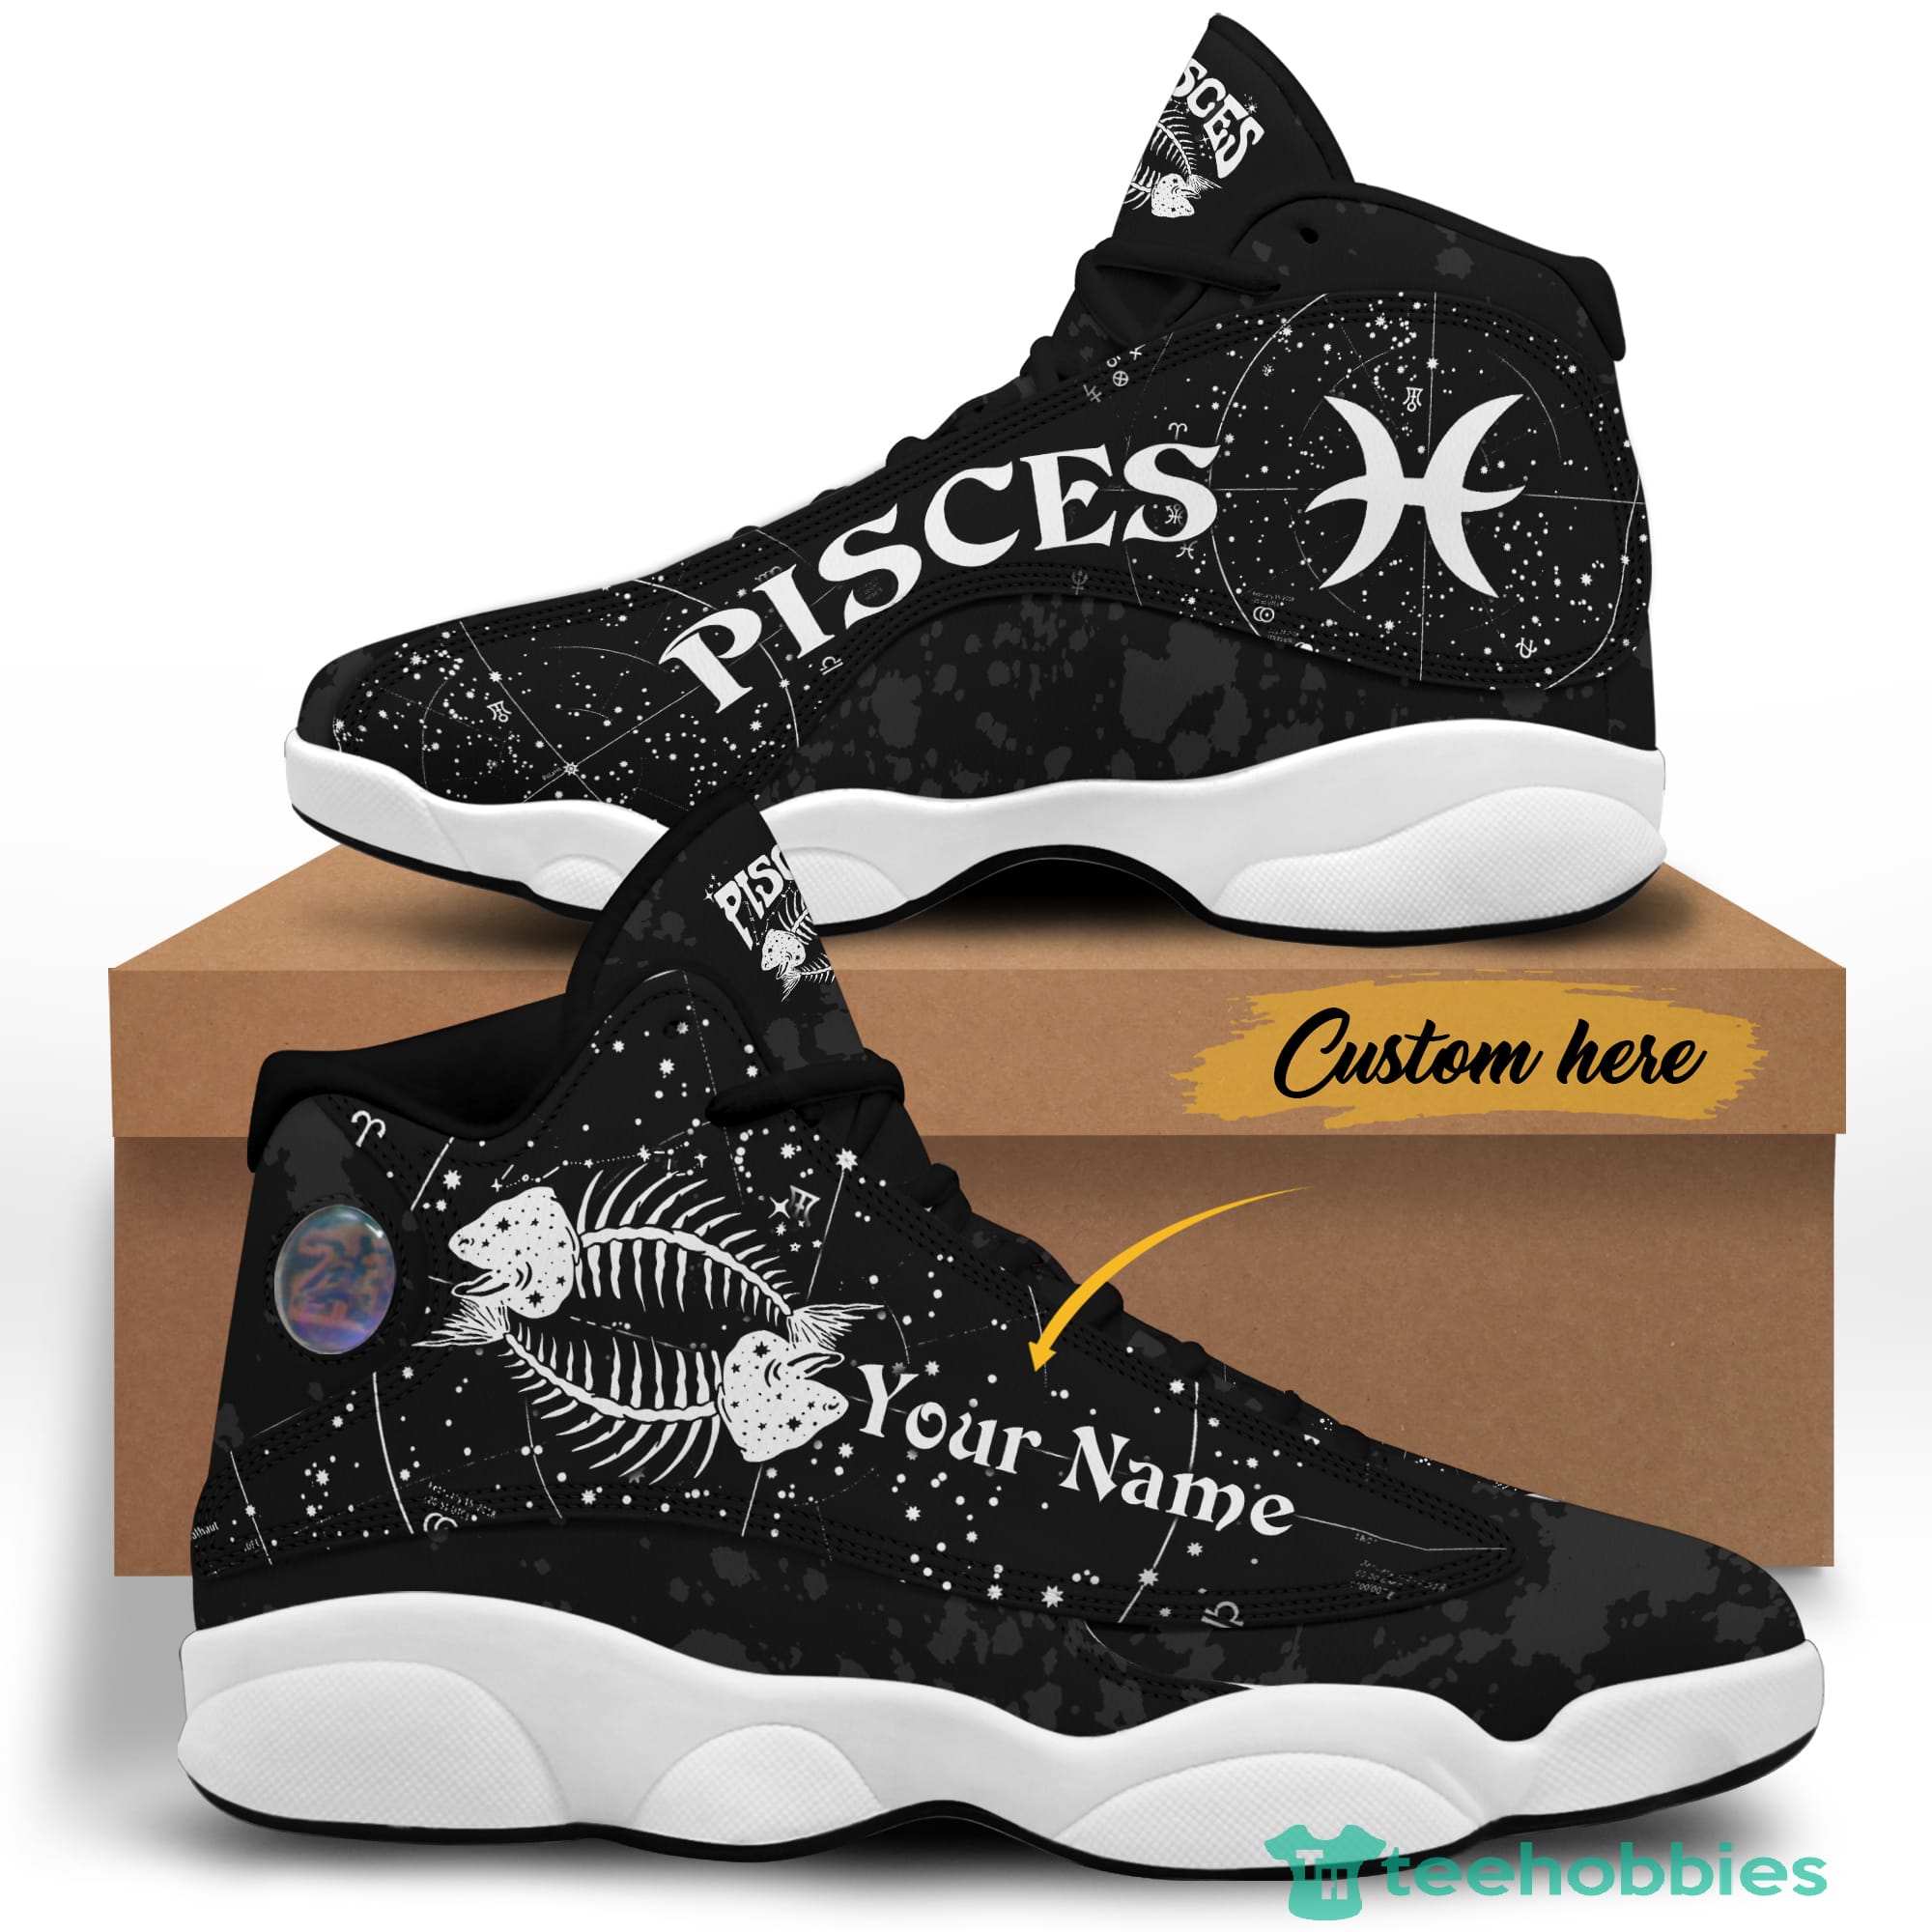 Black And White Pisces Personalized Name Air Jordan 13 Shoes SKU-264